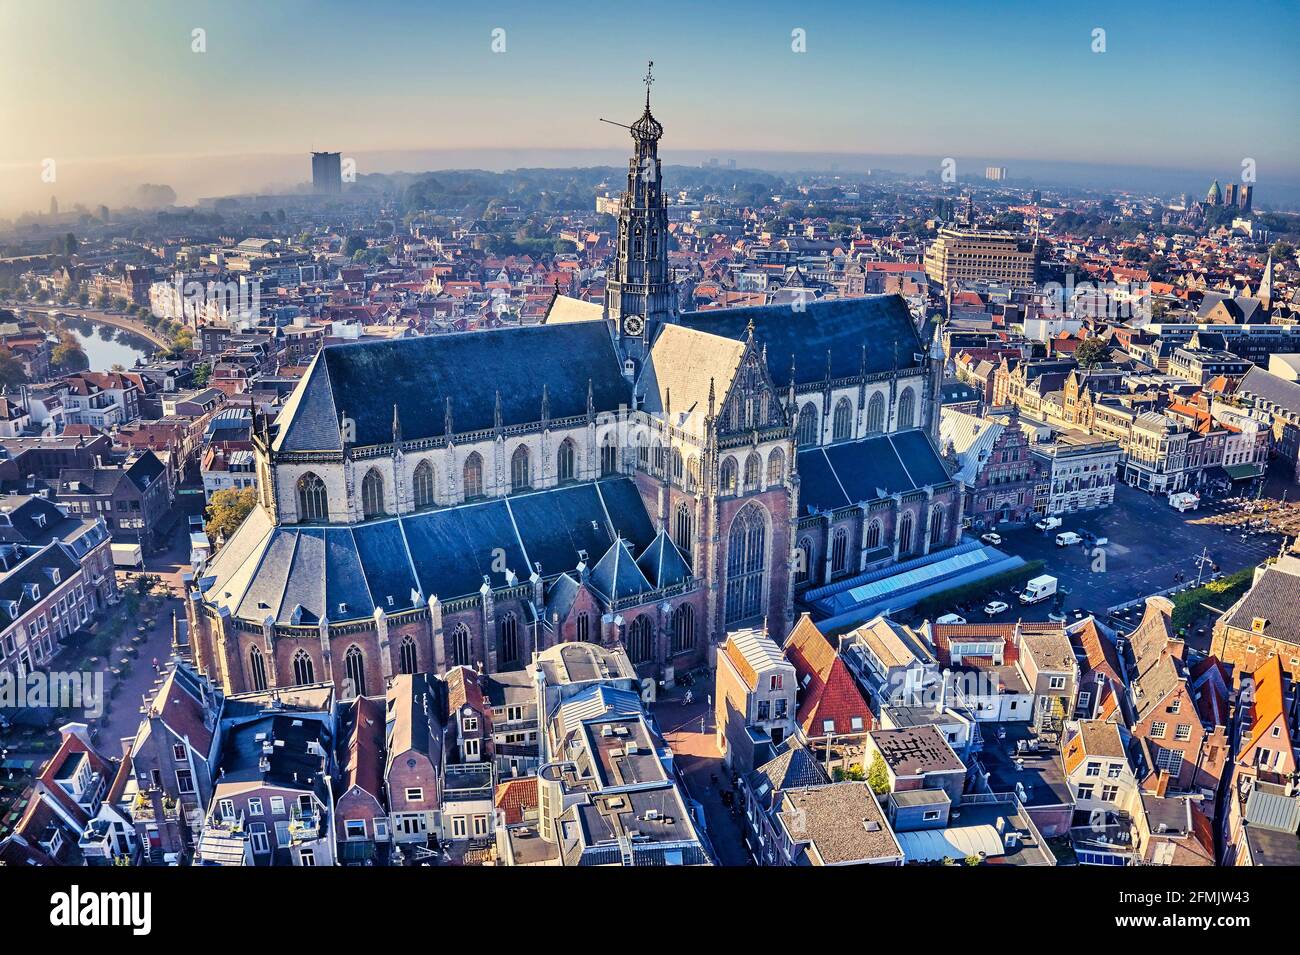 Netherlands, Haarlem - 20-03-2021: view from high above on the city of Haarlem Stock Photo